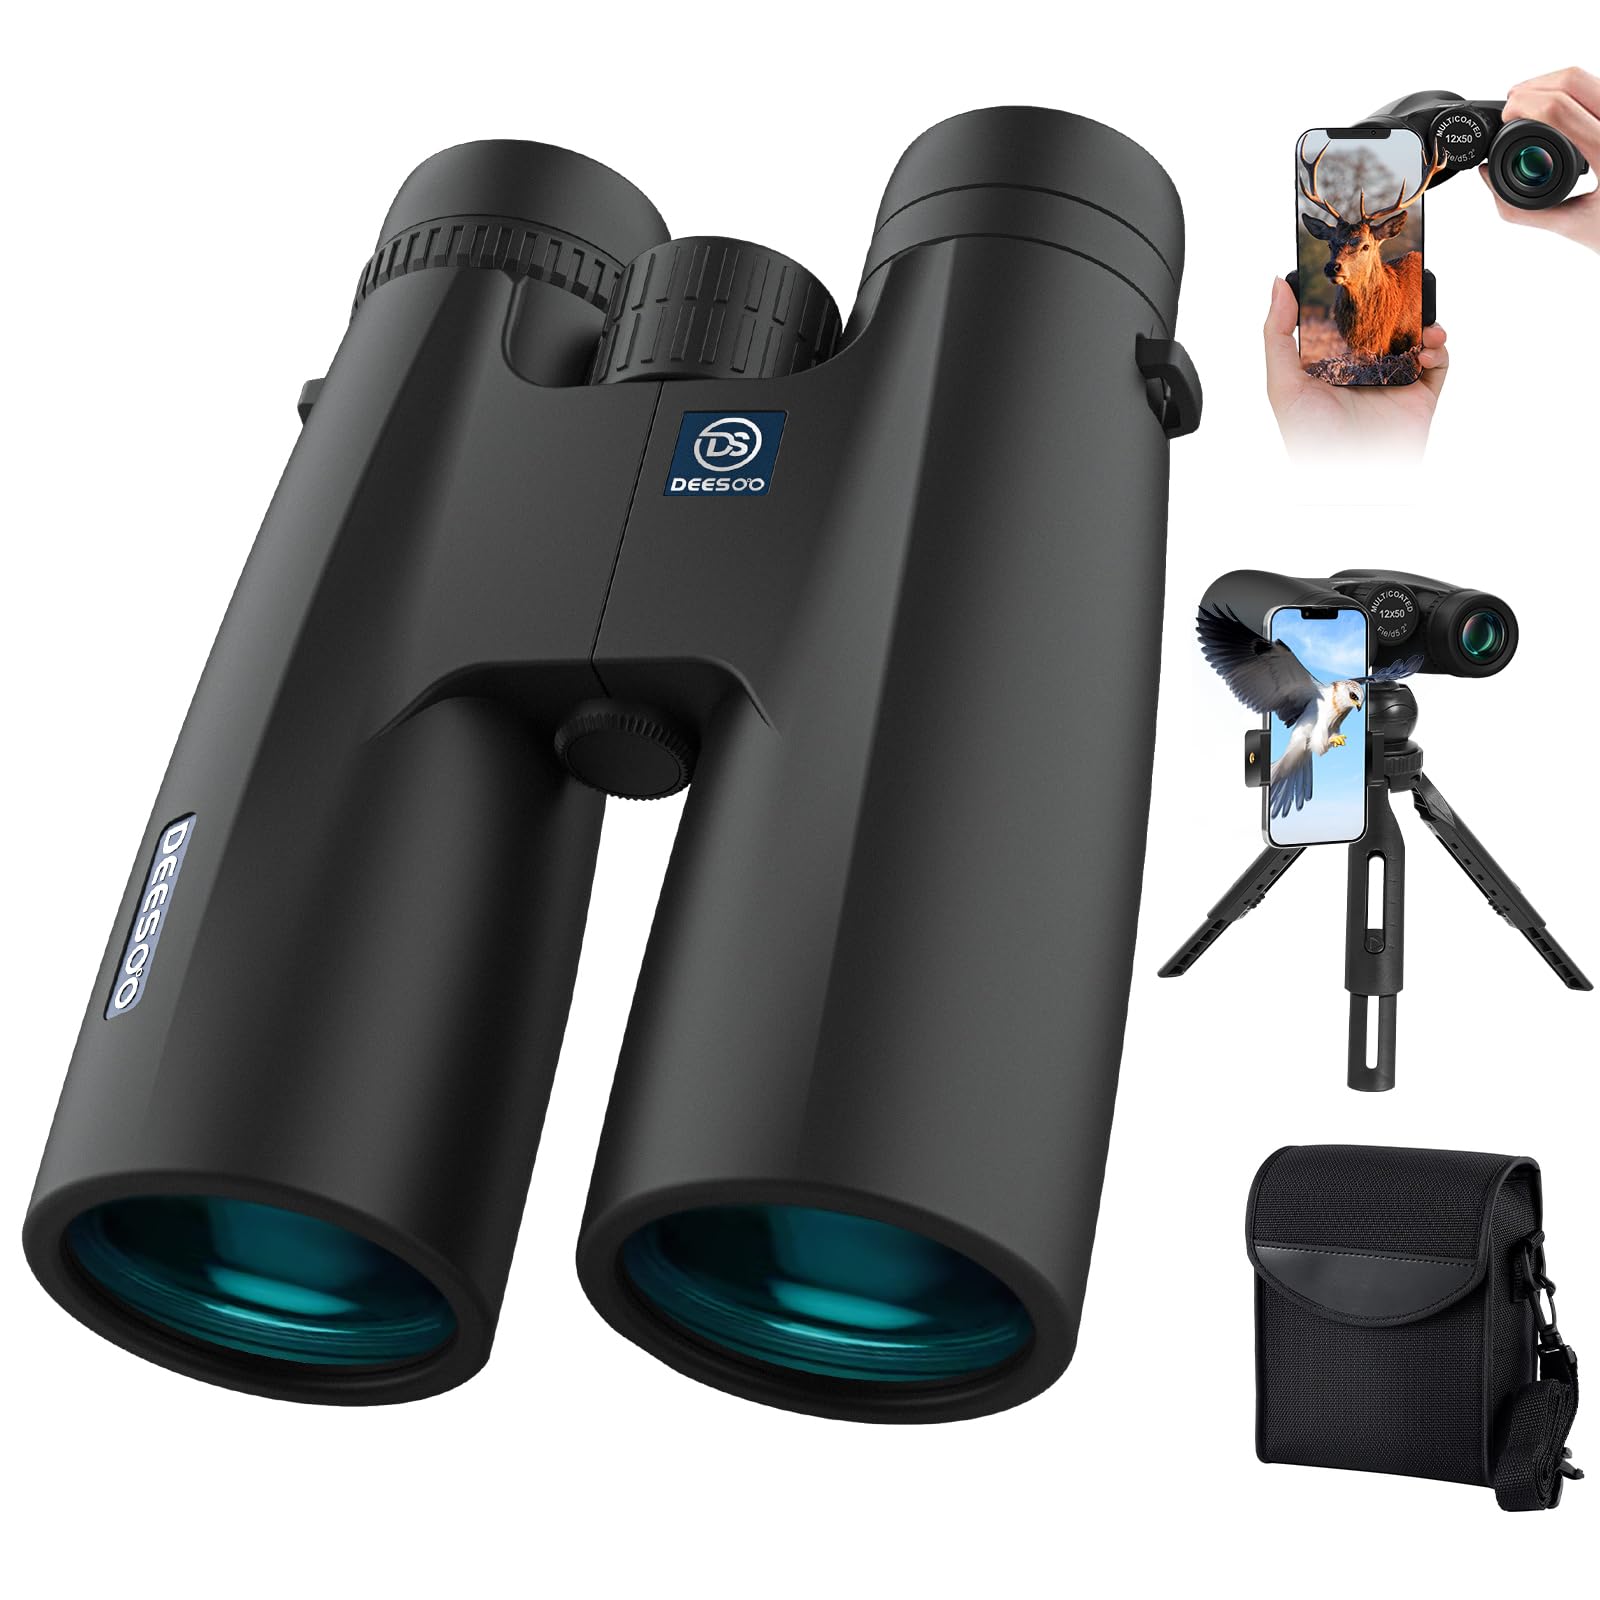 12X50 Professional HD Binoculars for Adults with Phone Adapter and Foldable Tripod - High Power Binoculars with Large View - Super Bright Waterproof Binoculars for Bird Watching Hunting Stargazing